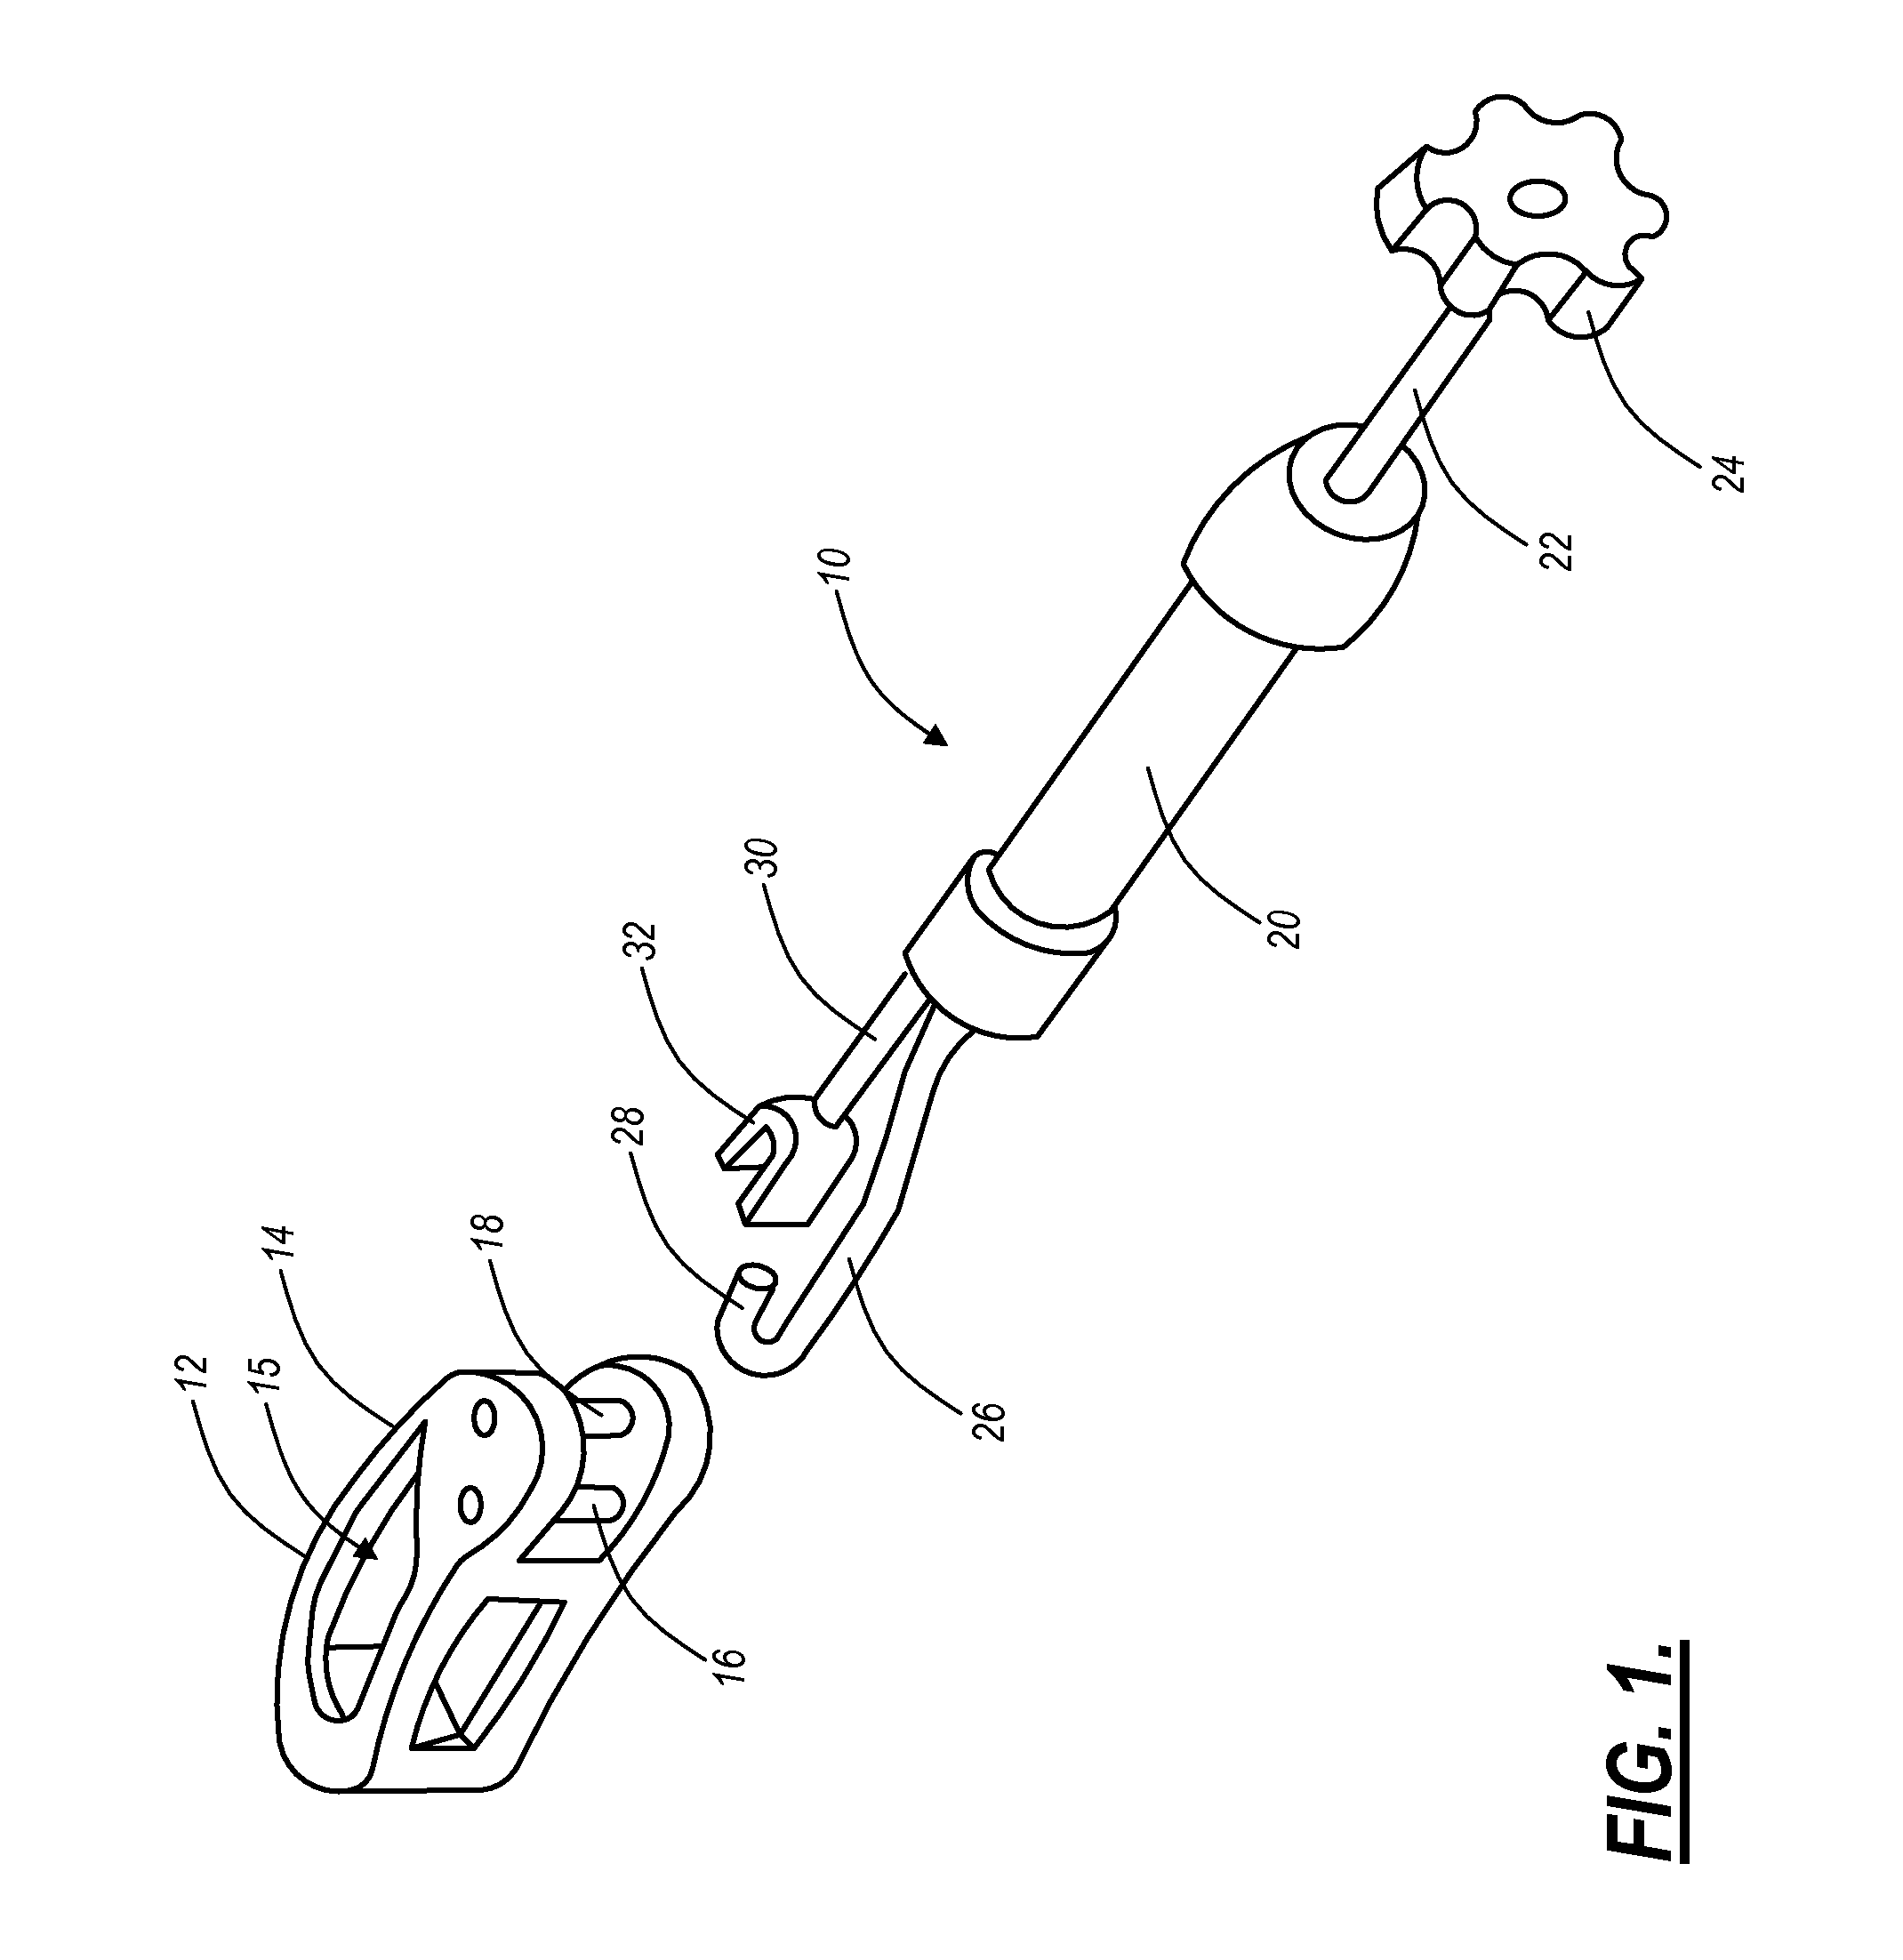 Surgical positioning assembly and associated spinal implant device and surgical methods